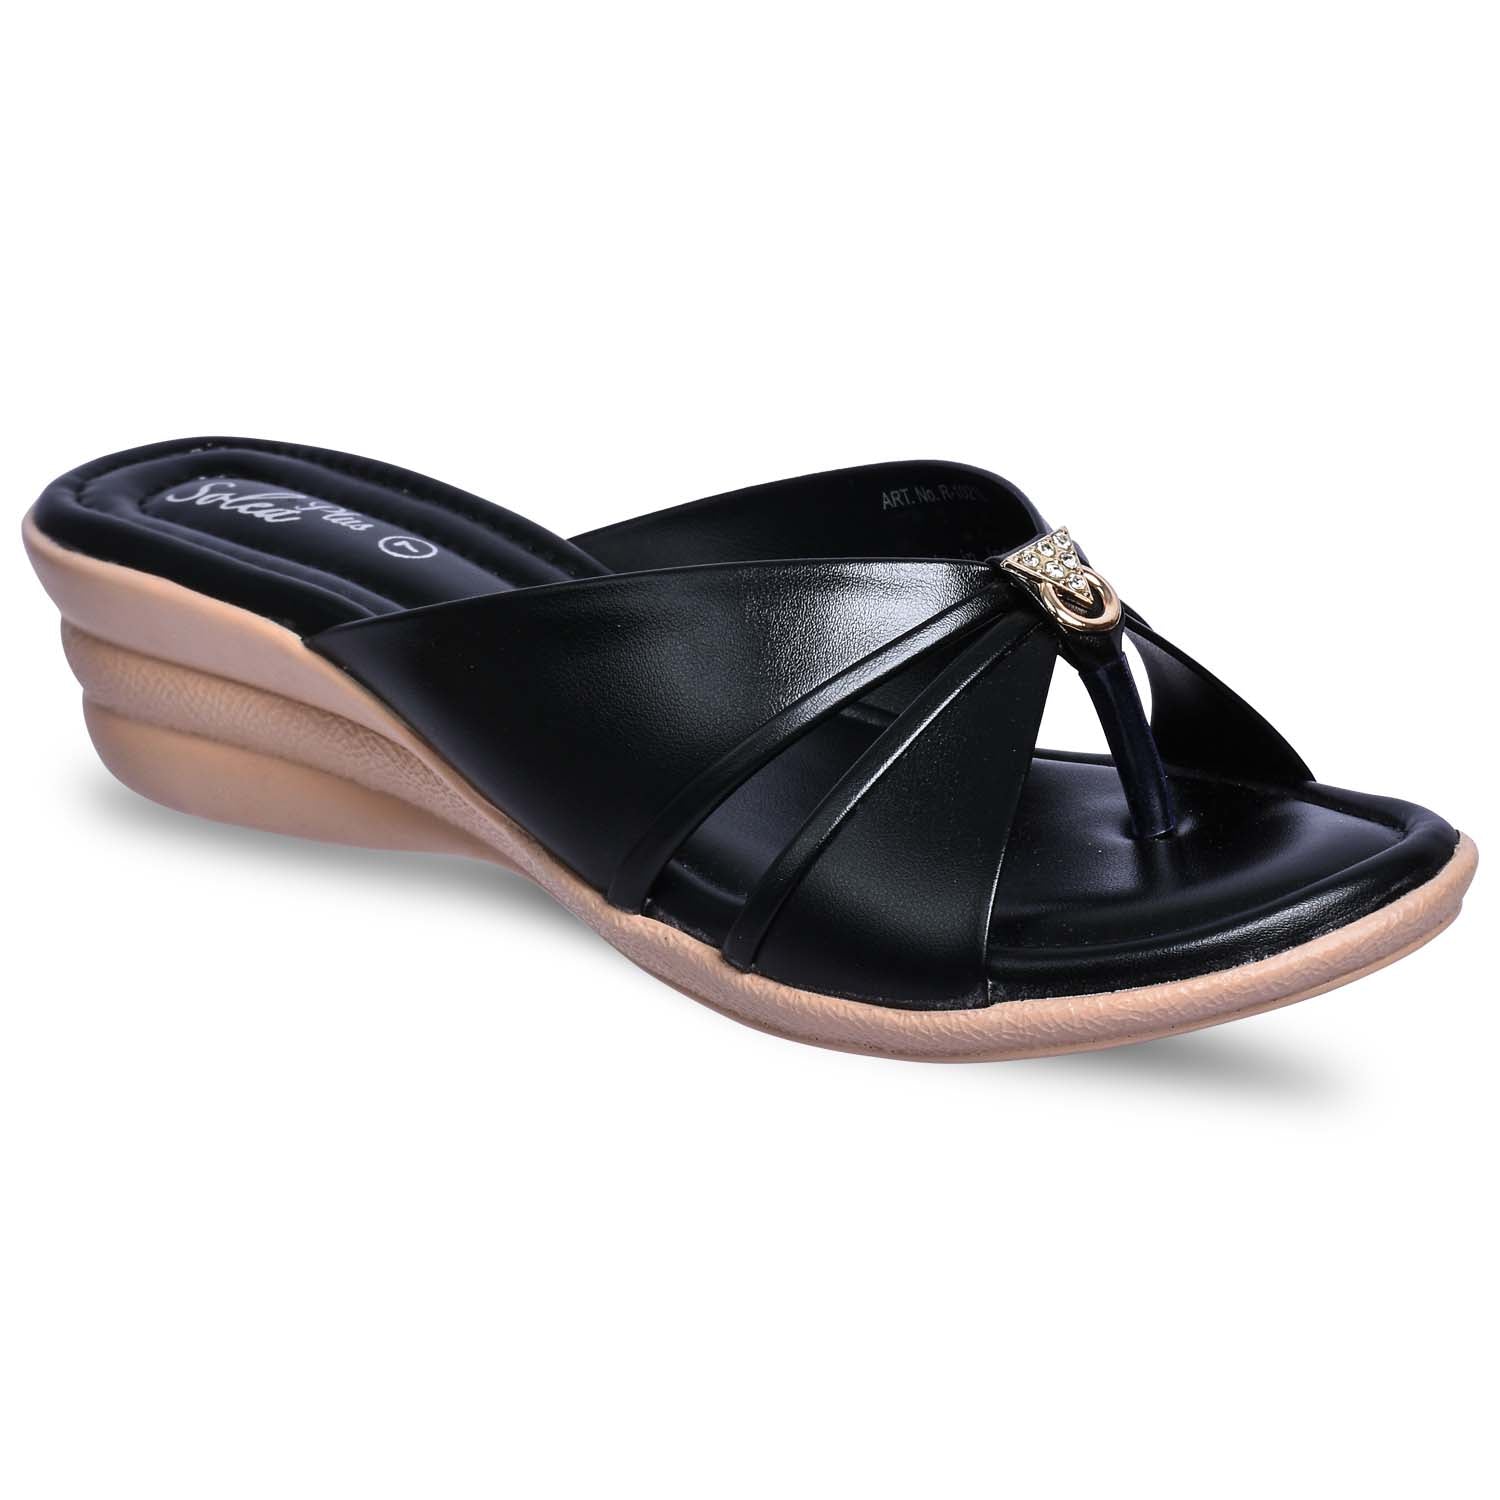 Paragon R1021L Women Sandals | Casual &amp; Formal Sandals | Stylish, Comfortable &amp; Durable | For Daily &amp; Occasion Wear